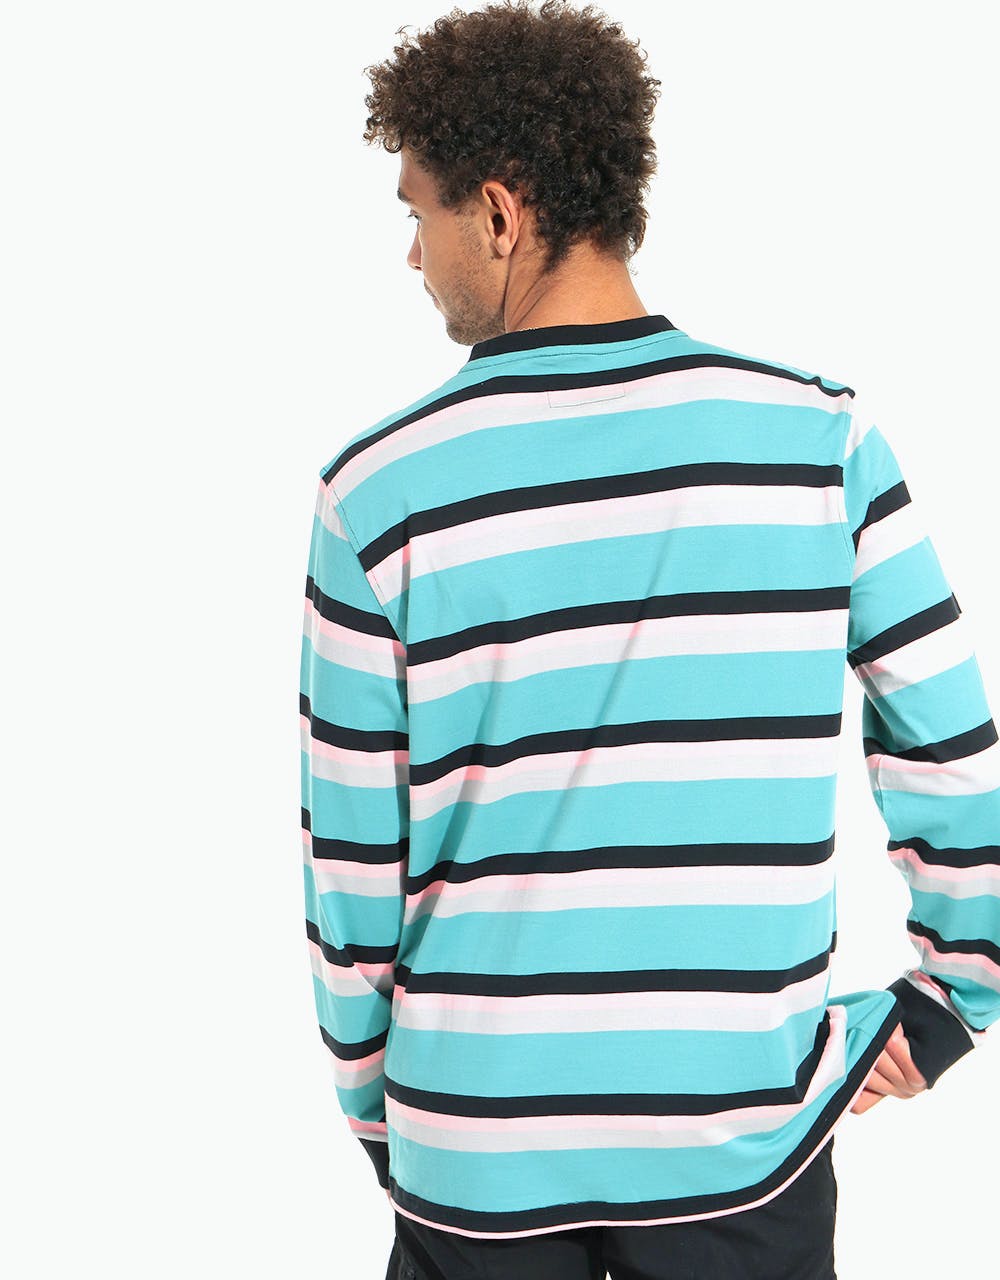 Welcome Medius Stripe L/S Knit T-Shirt - Dusty Teal